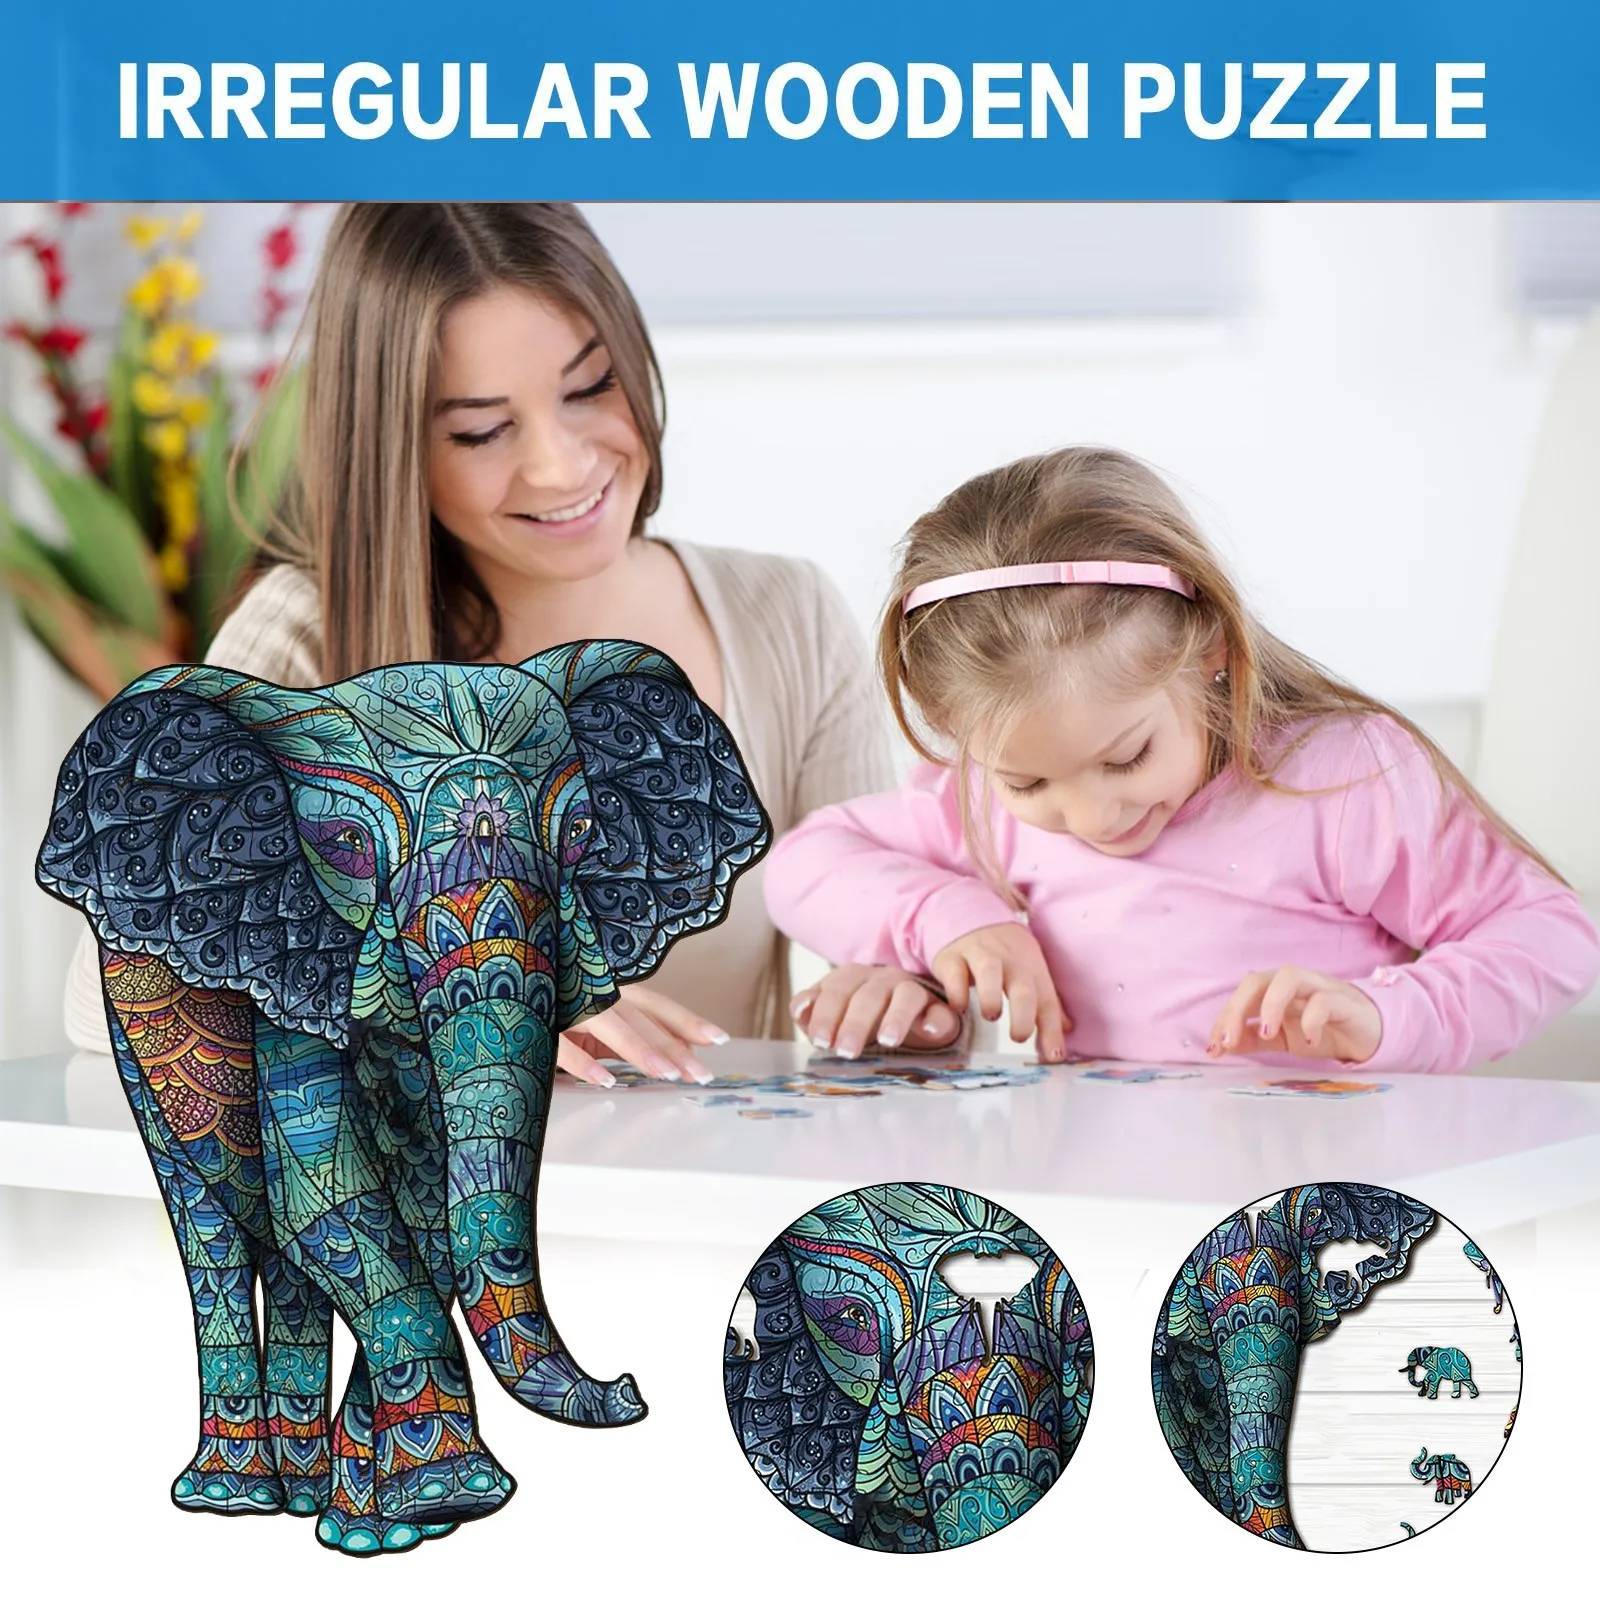 

2021 New Jigsaw Puzzle For Adults Children Funny Elephant Tribal Shaped Diy Jigsaw Puzzle Assemble Toys For Girls Boys Training#